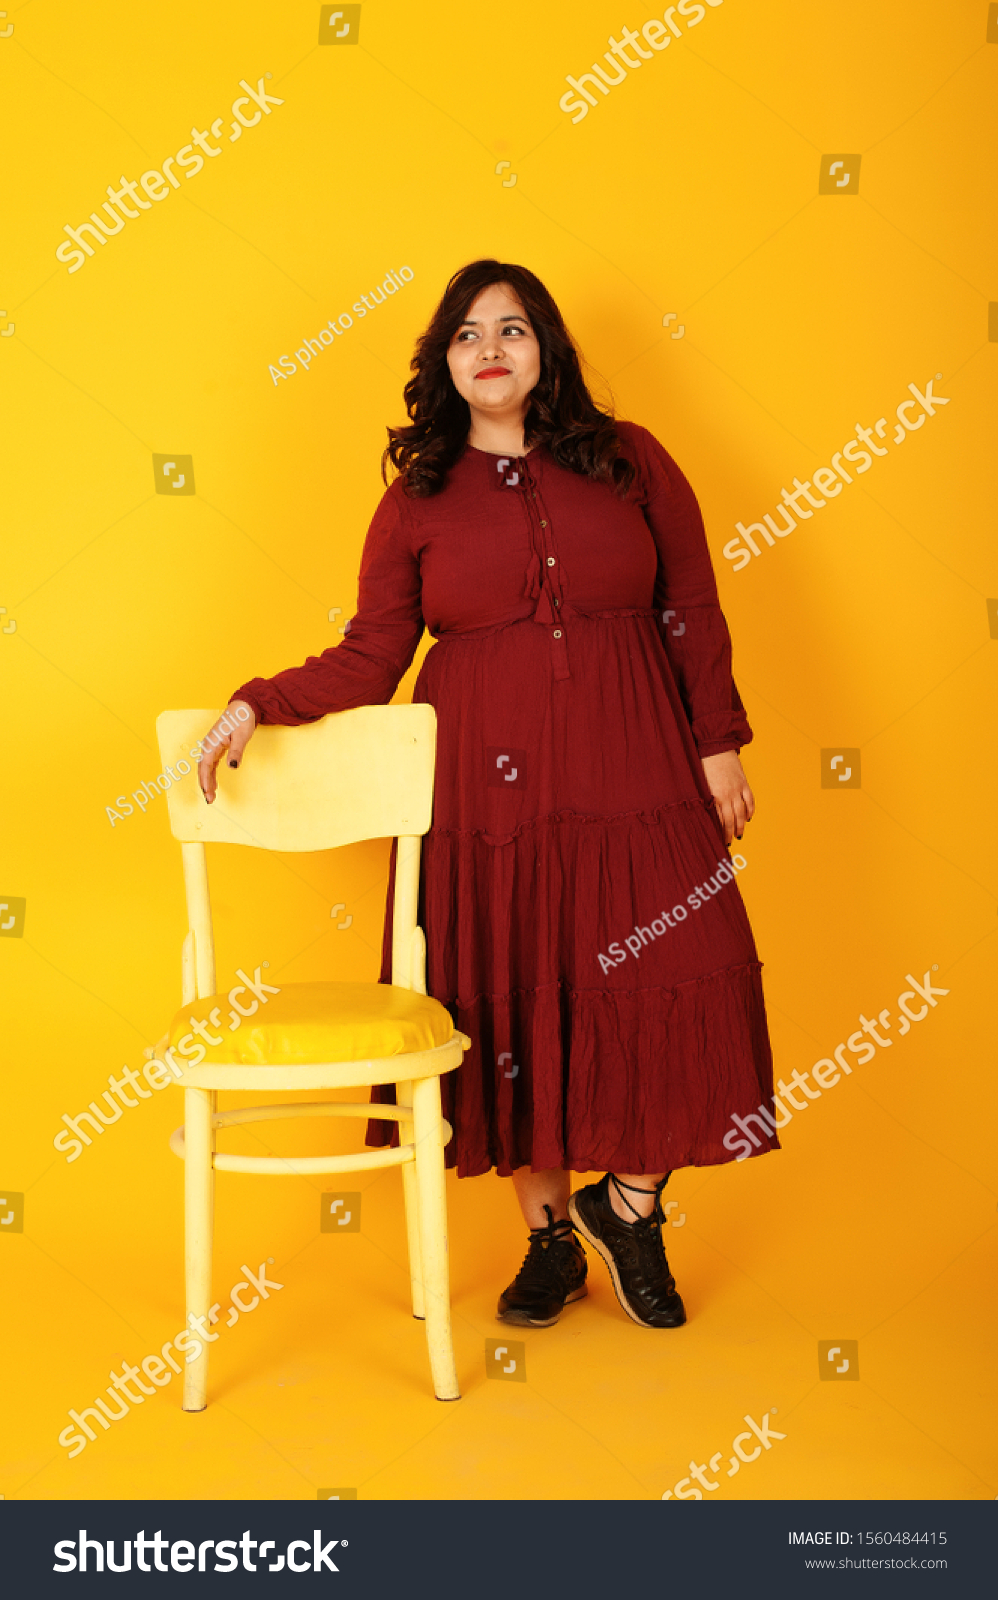 Attractive south asian woman in deep red gown dress posed at studio on yellow background with chair. #1560484415